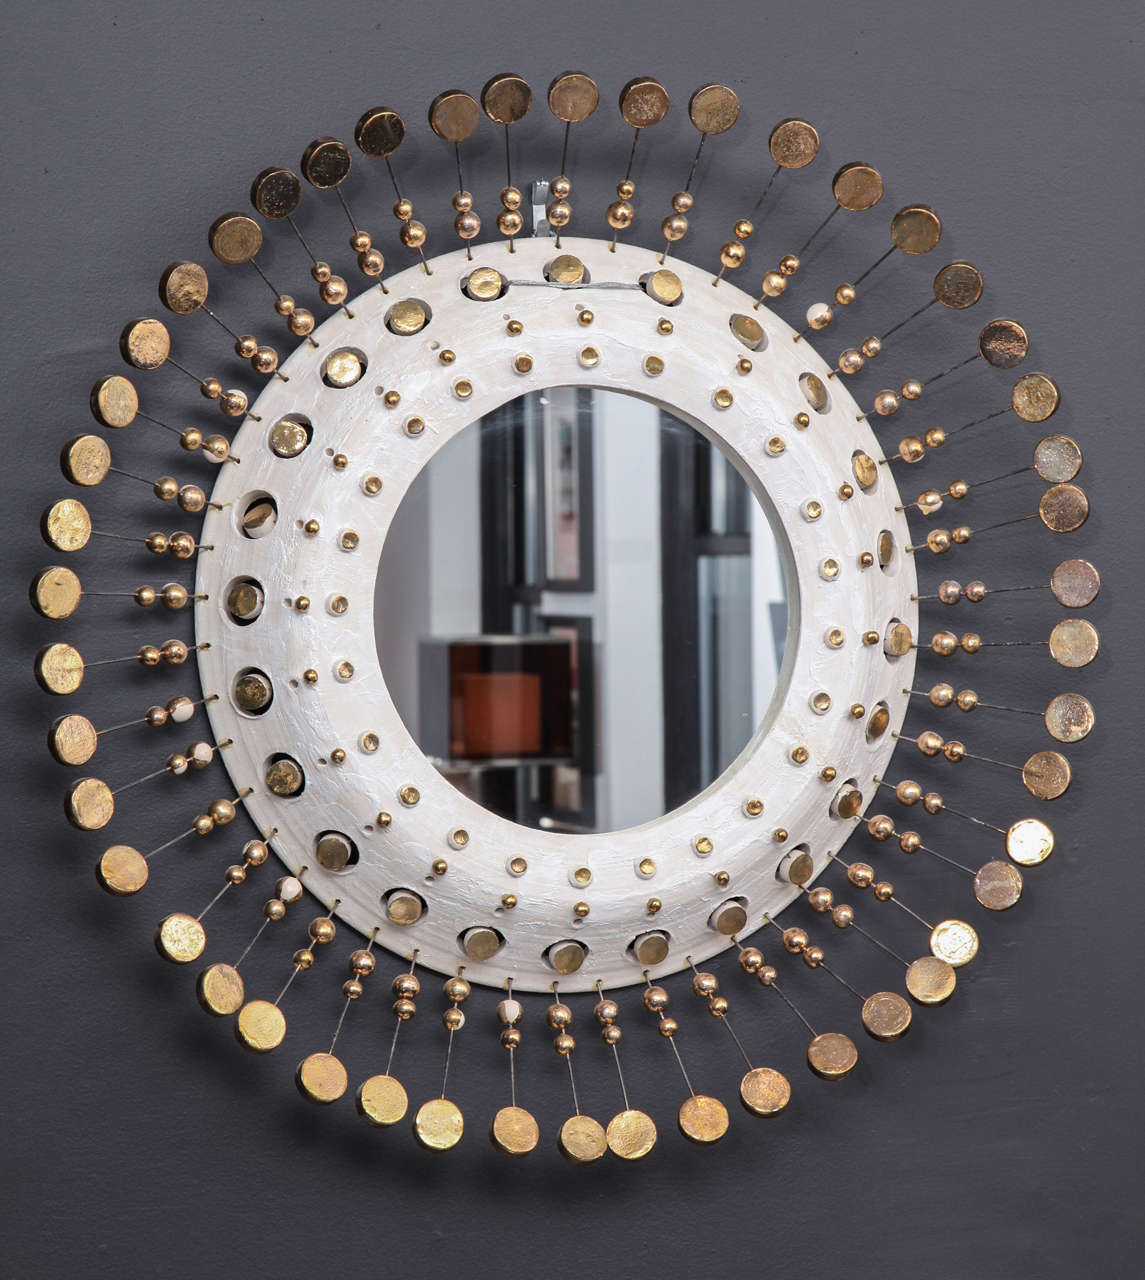 Black glaze over ceramic embellished with gold paint, detailed with crackled glaze balls and disks on wire to form a stunning starburst mirror.
France 1940